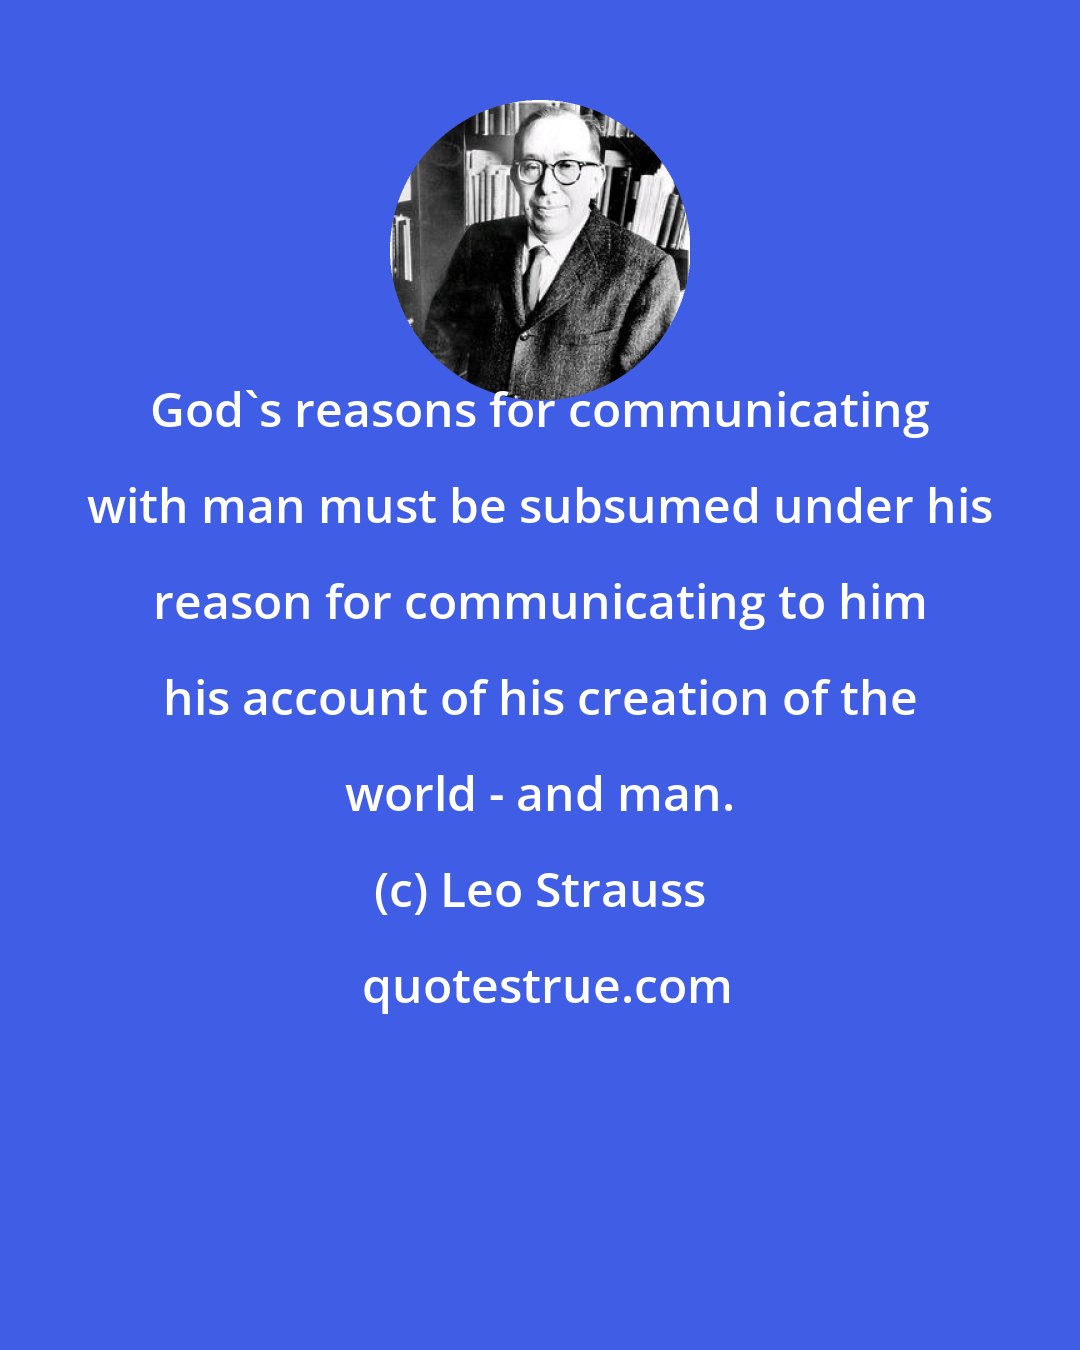 Leo Strauss: God's reasons for communicating with man must be subsumed under his reason for communicating to him his account of his creation of the world - and man.